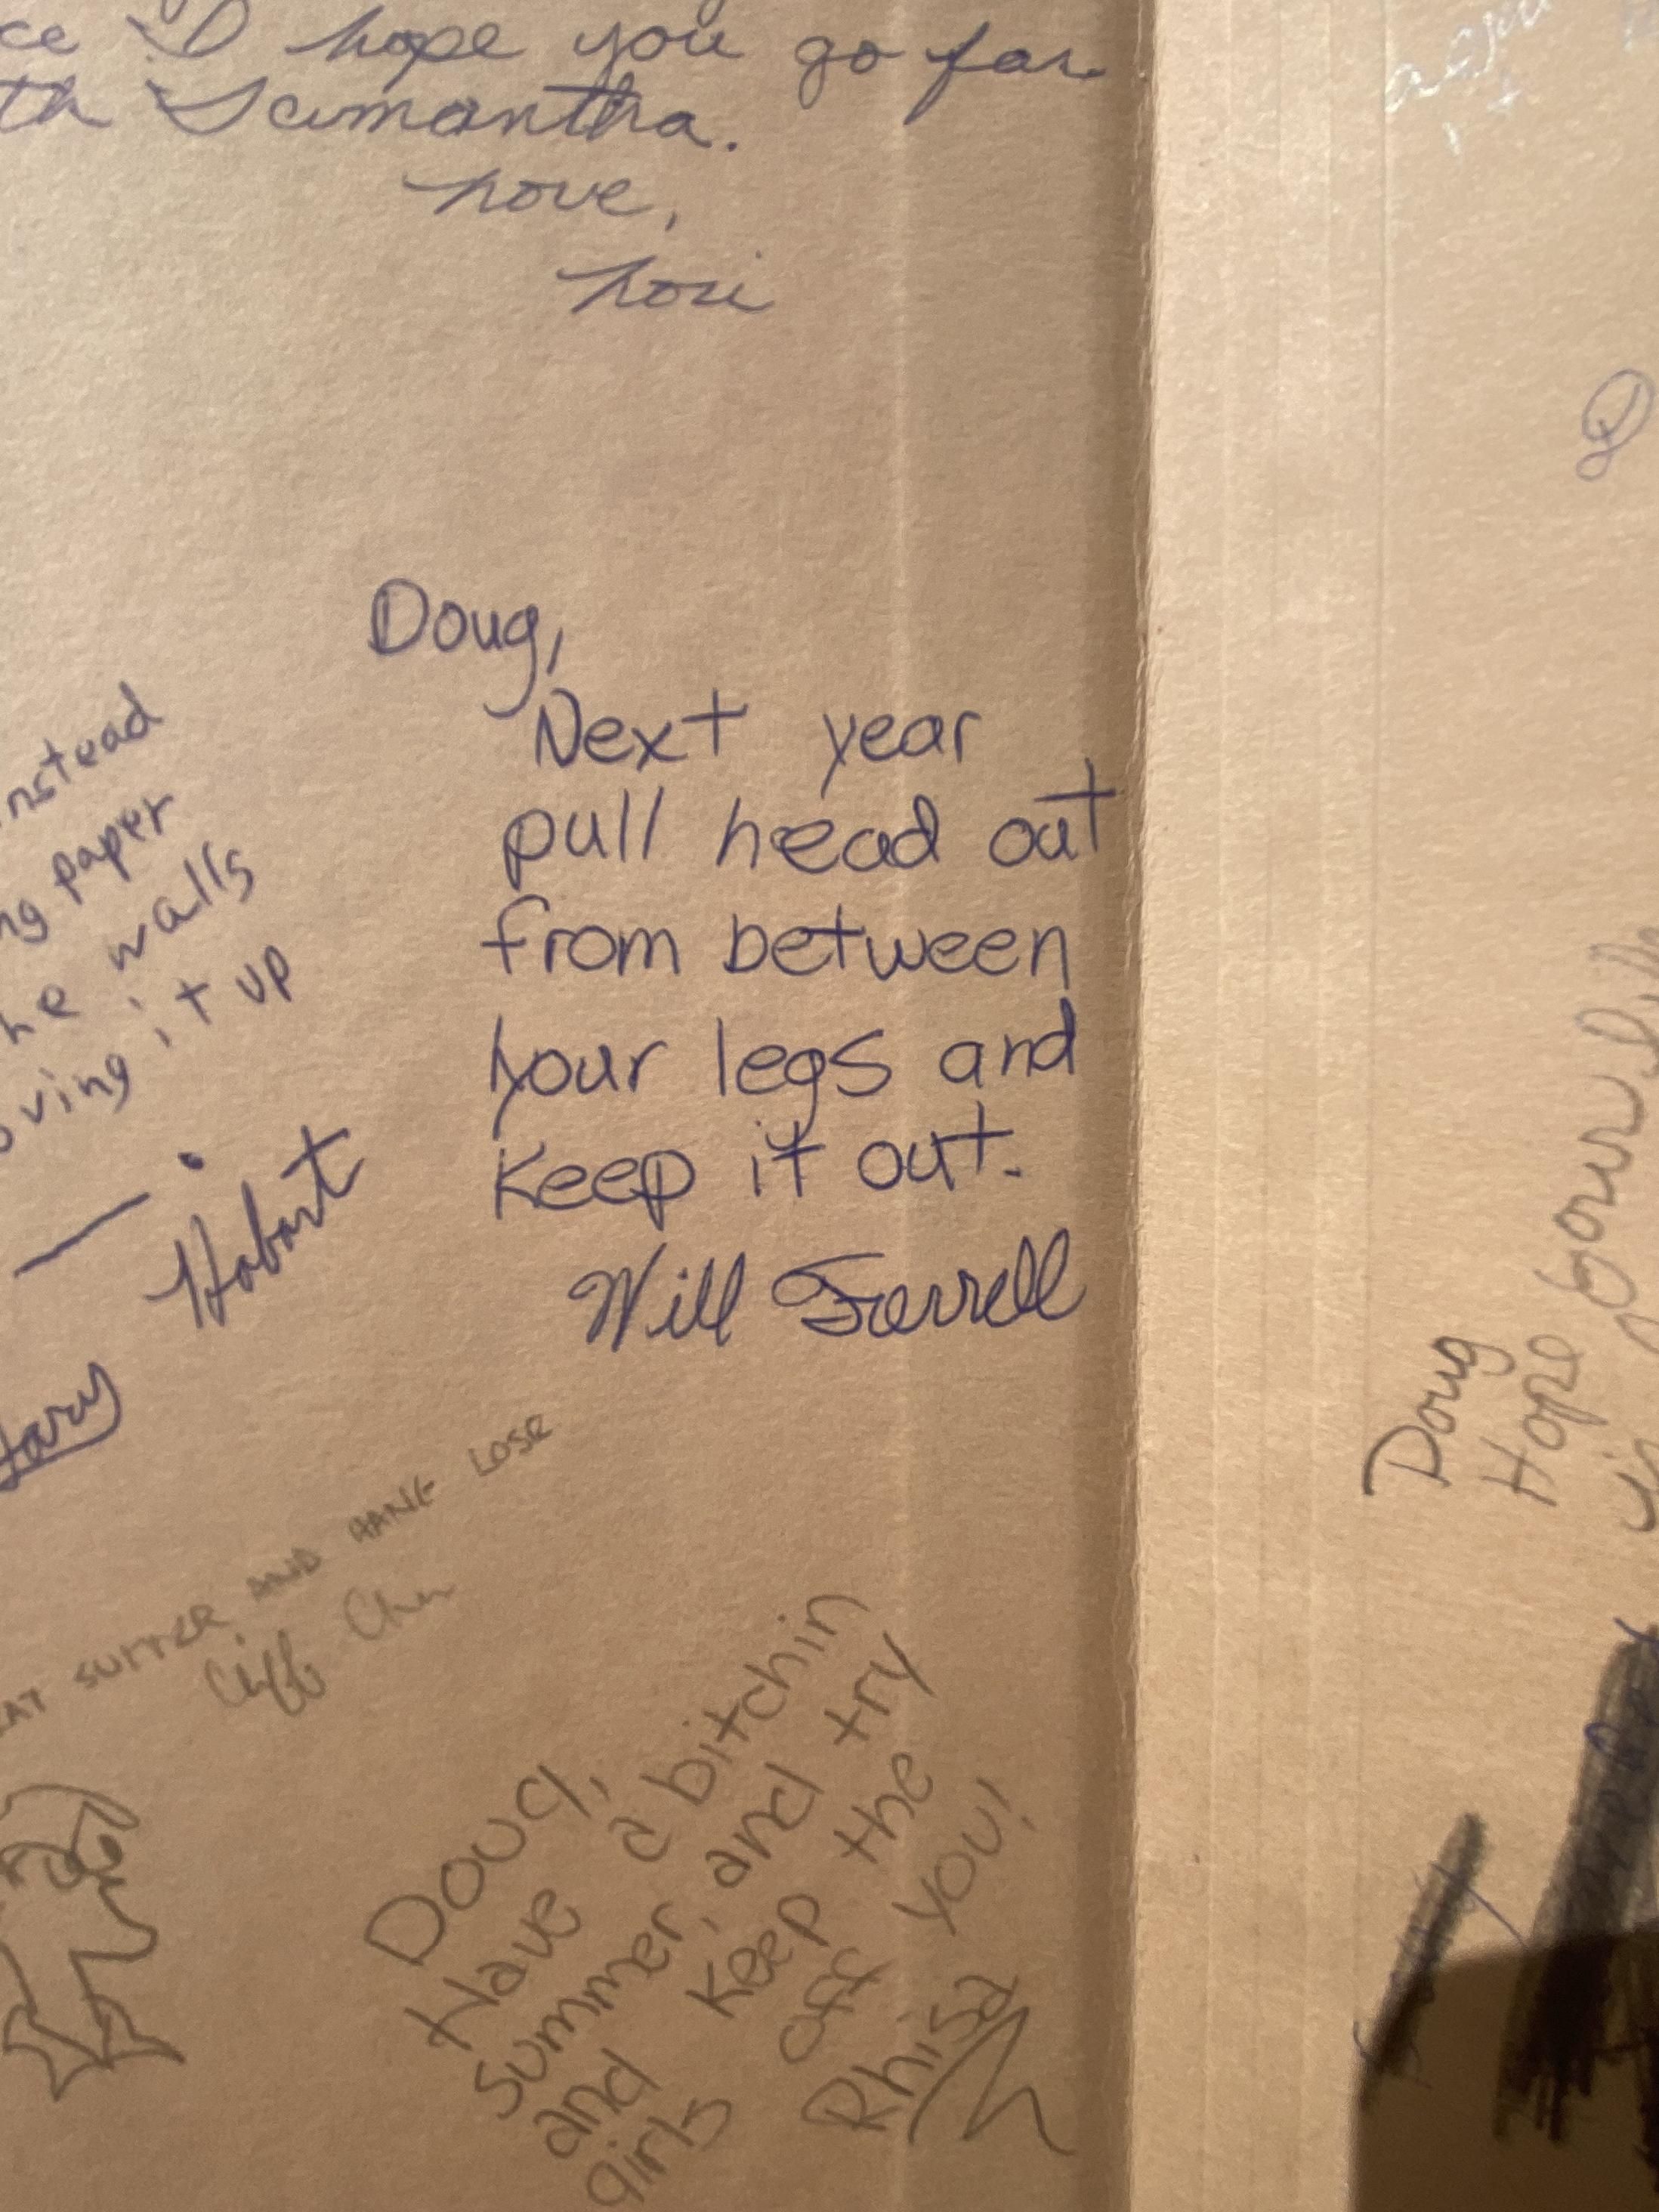 Will Ferrell's advice to my father in his junior high yearbook. They went to school together.